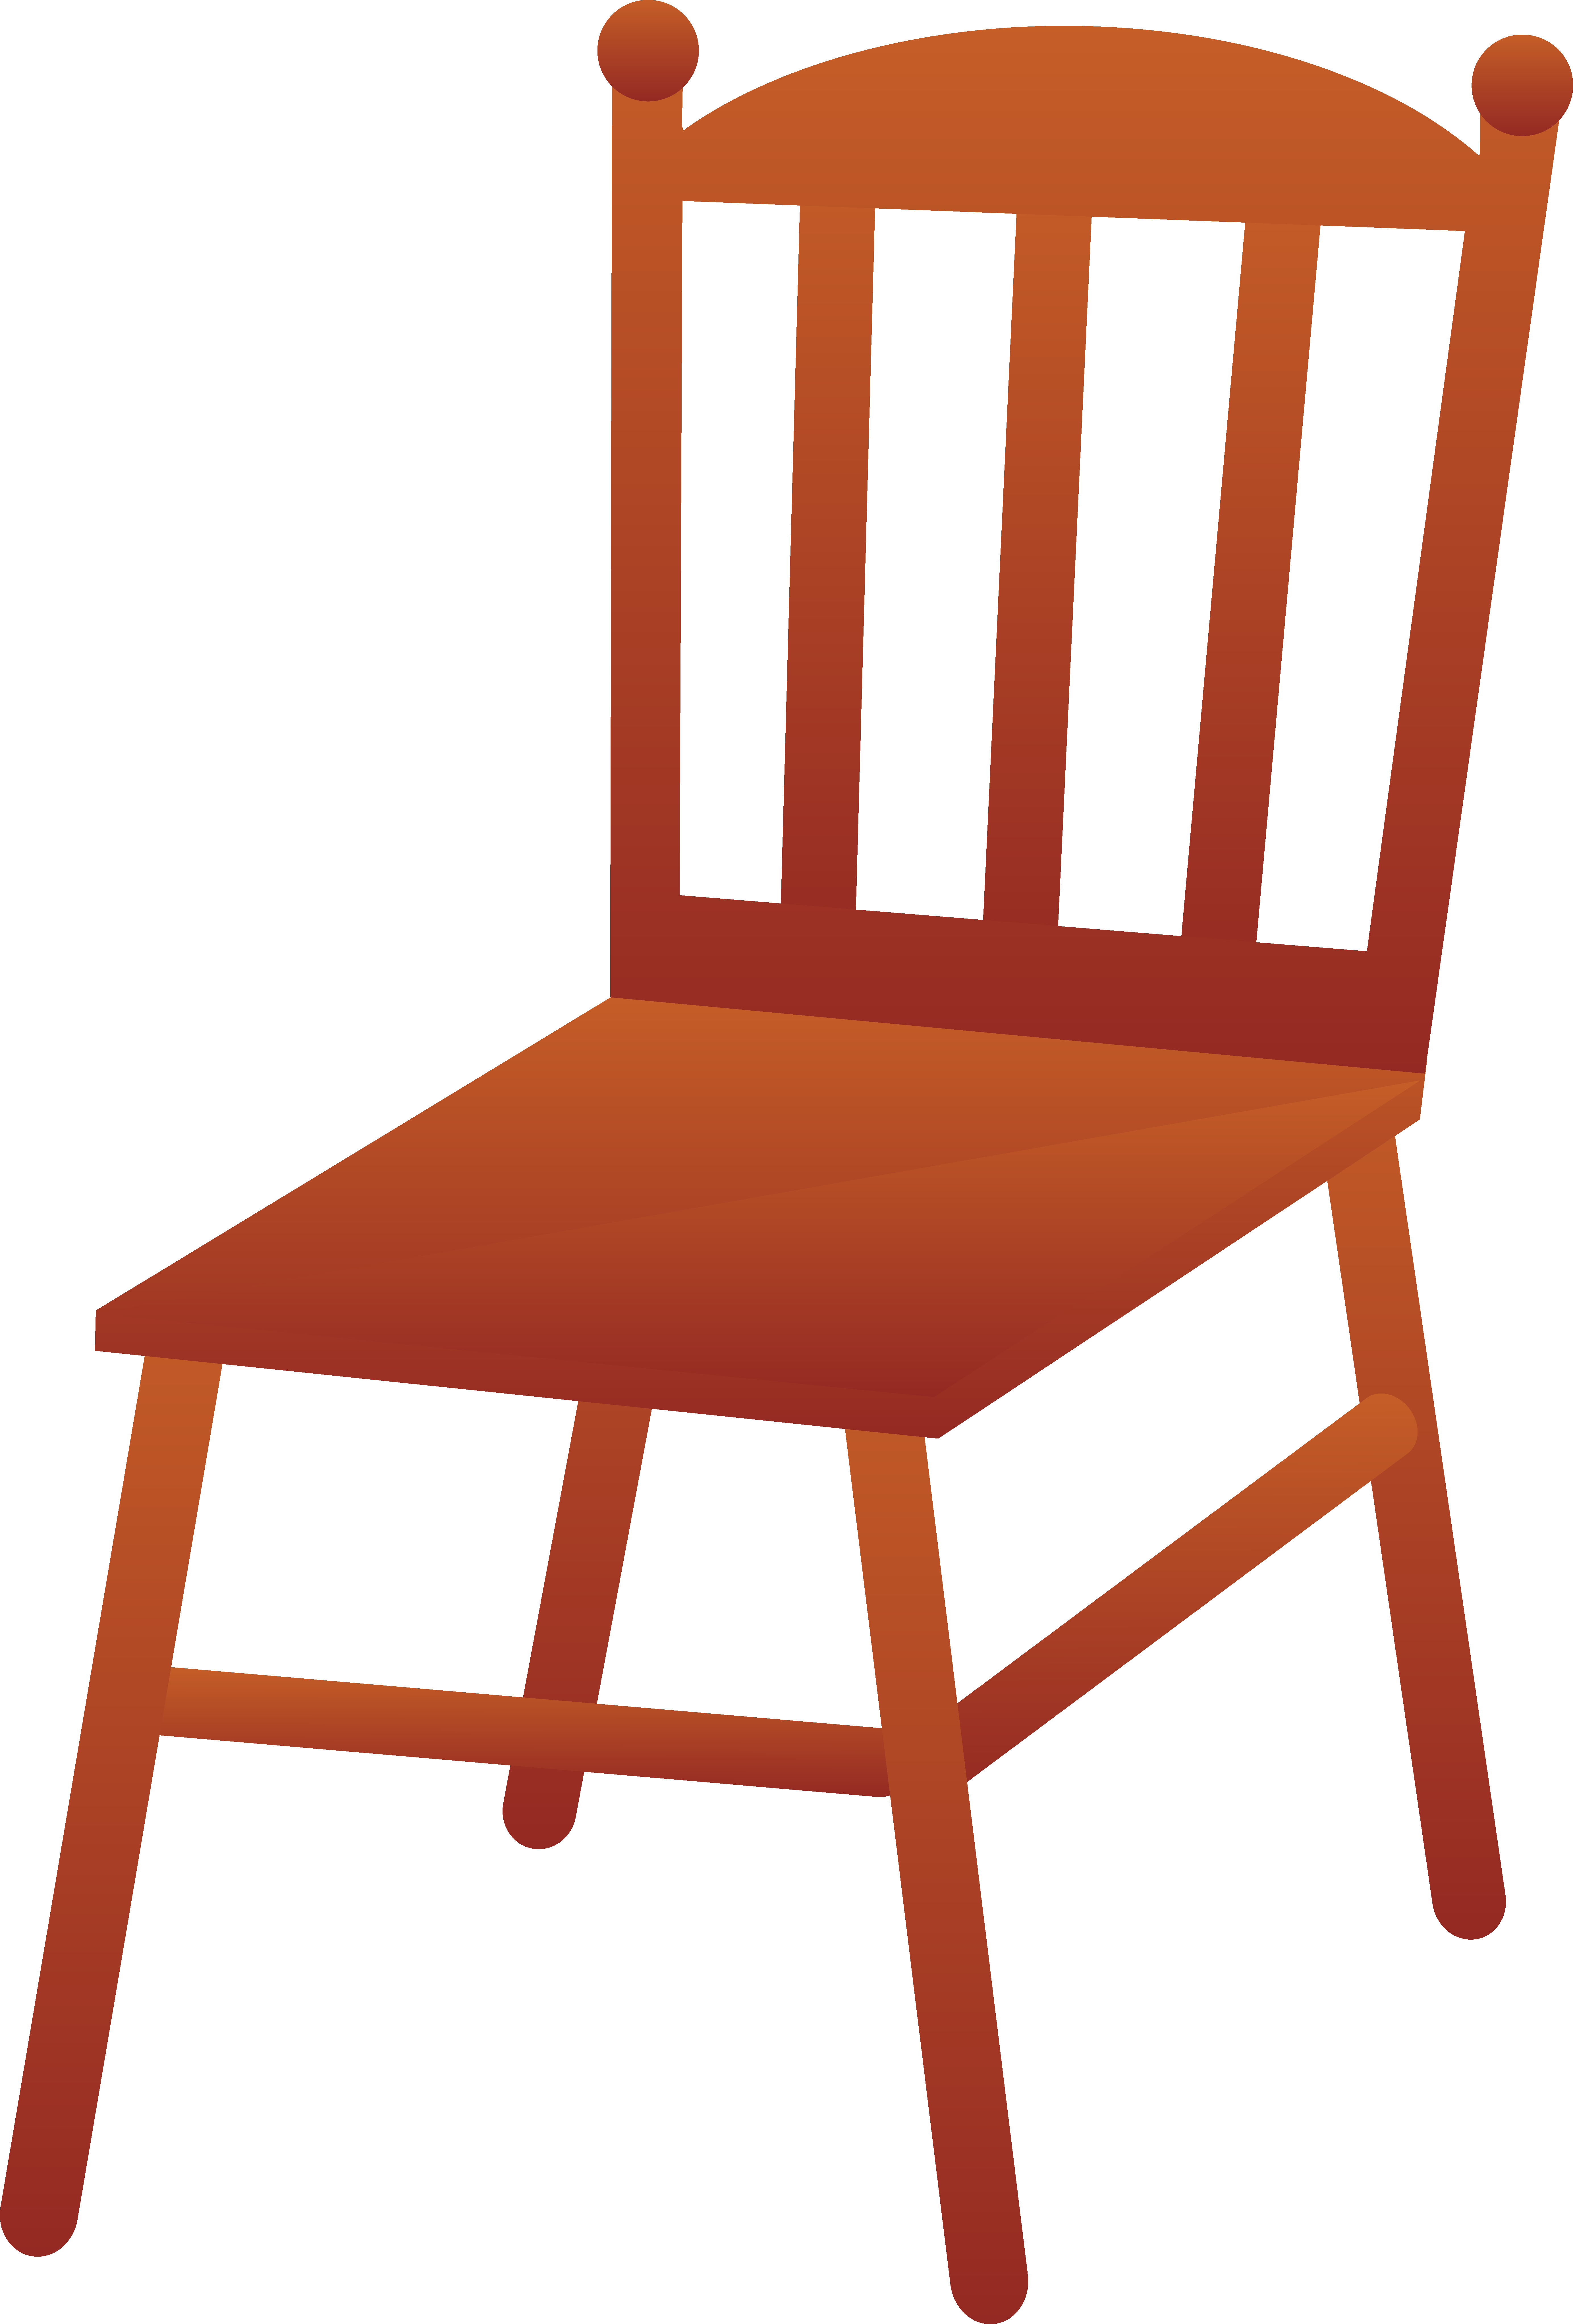 Chair - Chair Clipart - Png Download (5534x8175), Png Download